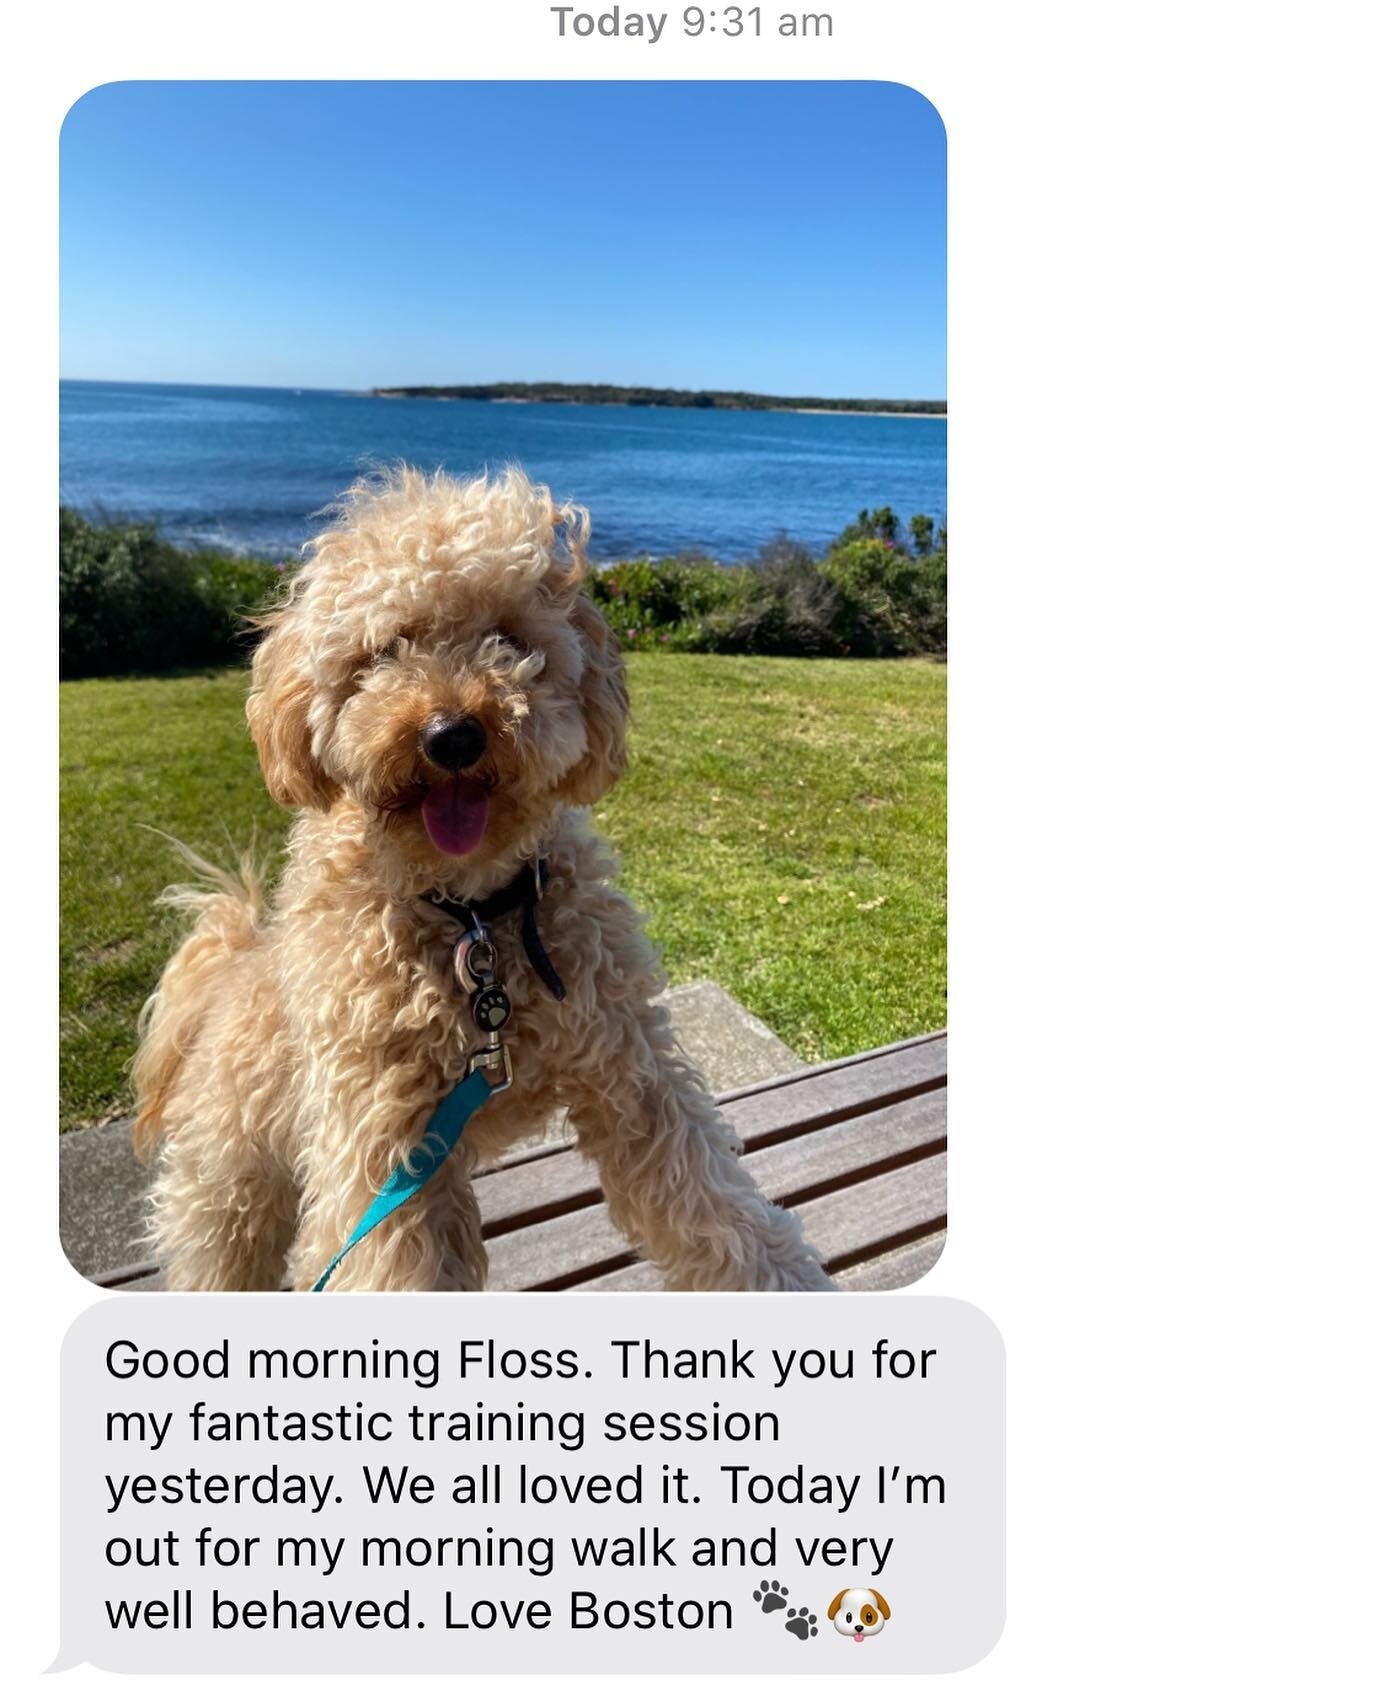 Thanks Boston for this wonderful message this morning! 🐶 Love getting messages like this 🙌🏼 #txtsfromdog #opposablethumbs #dogsdoingthings #dogtraining #proud #waggingschool